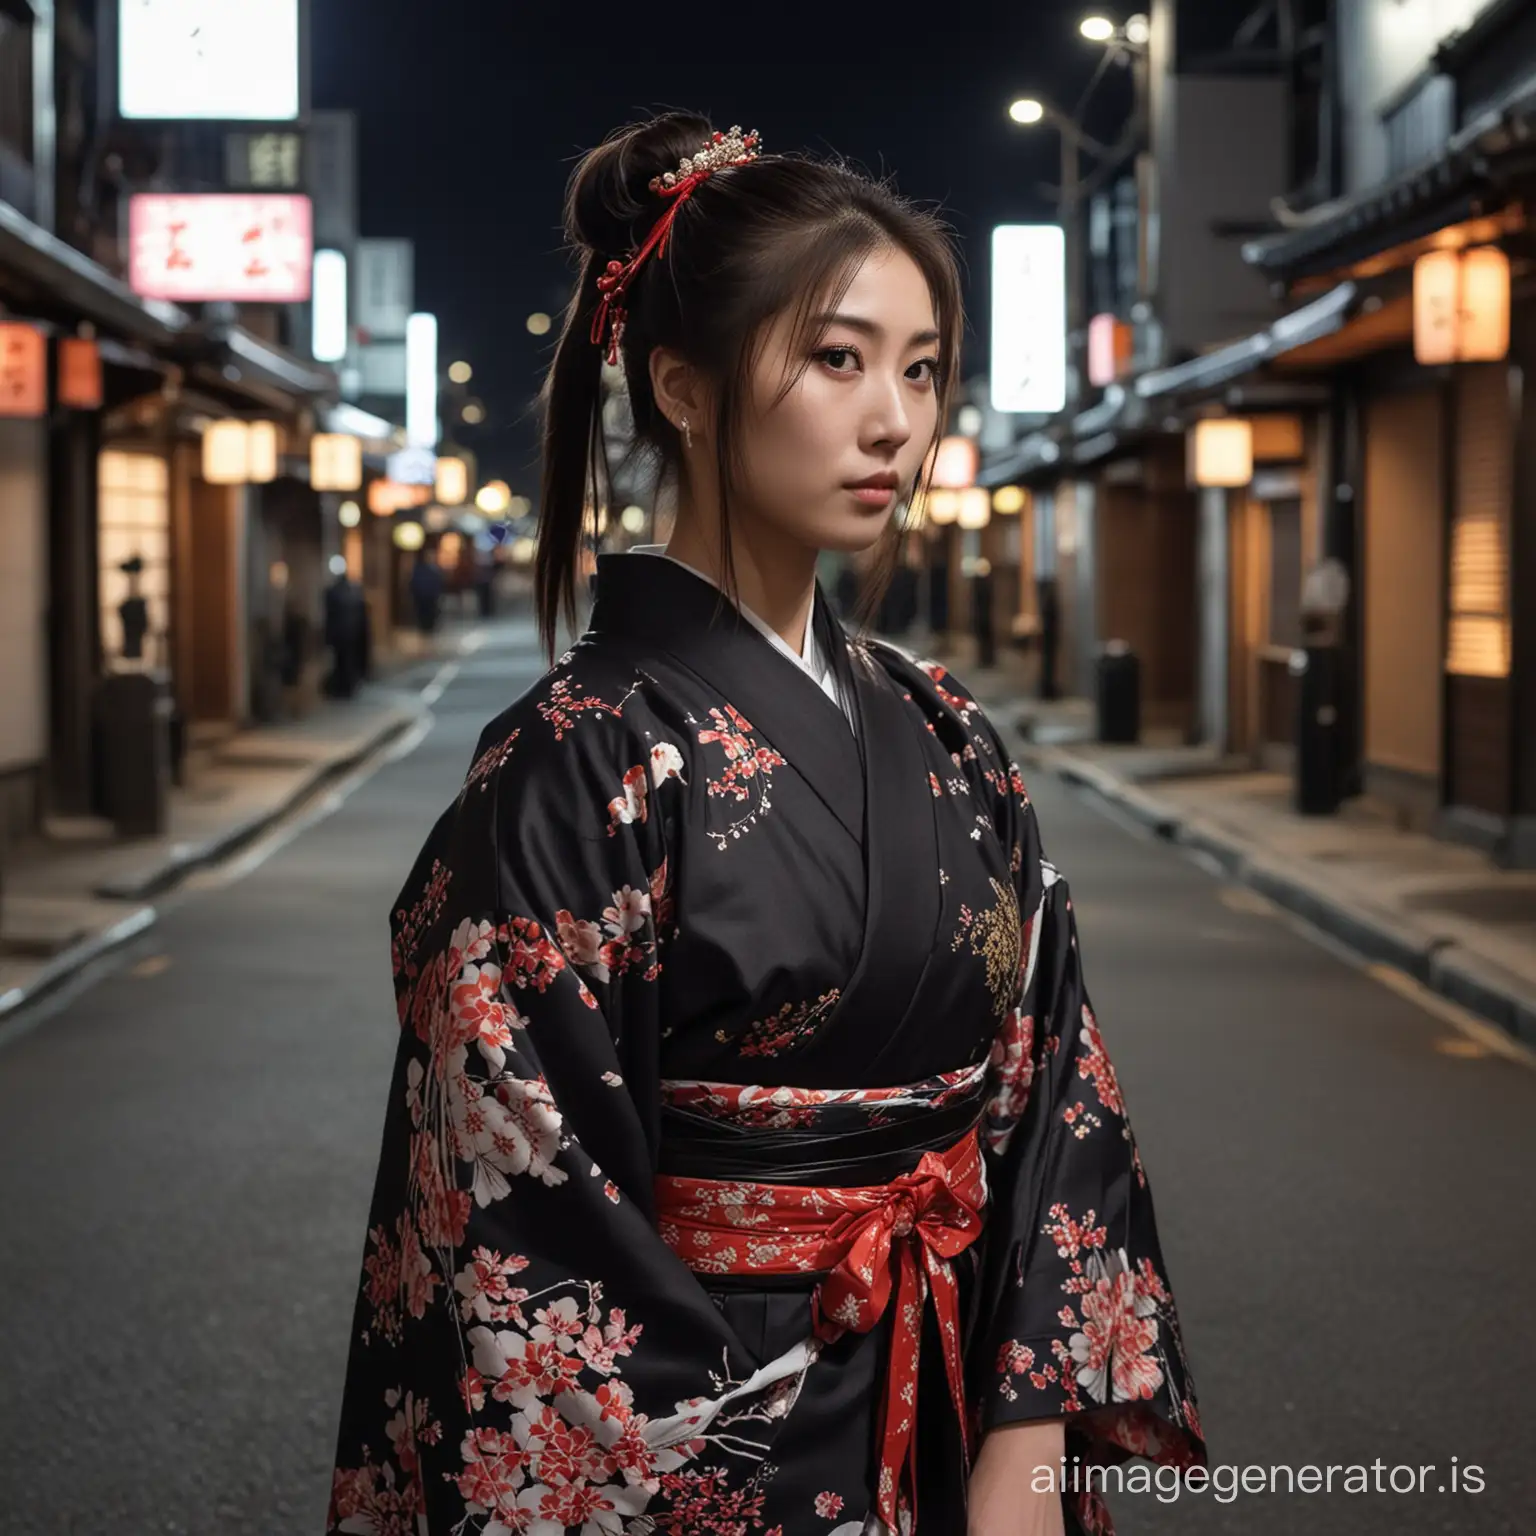 A Japanese woman, super attractive but creepy. She is in the middle of the street at night, dressed in a traditional Japanese dress. She has a ponytail, she has a samurai. She doesn't look very innocent, almost like goth and she has a samurai on her hand.